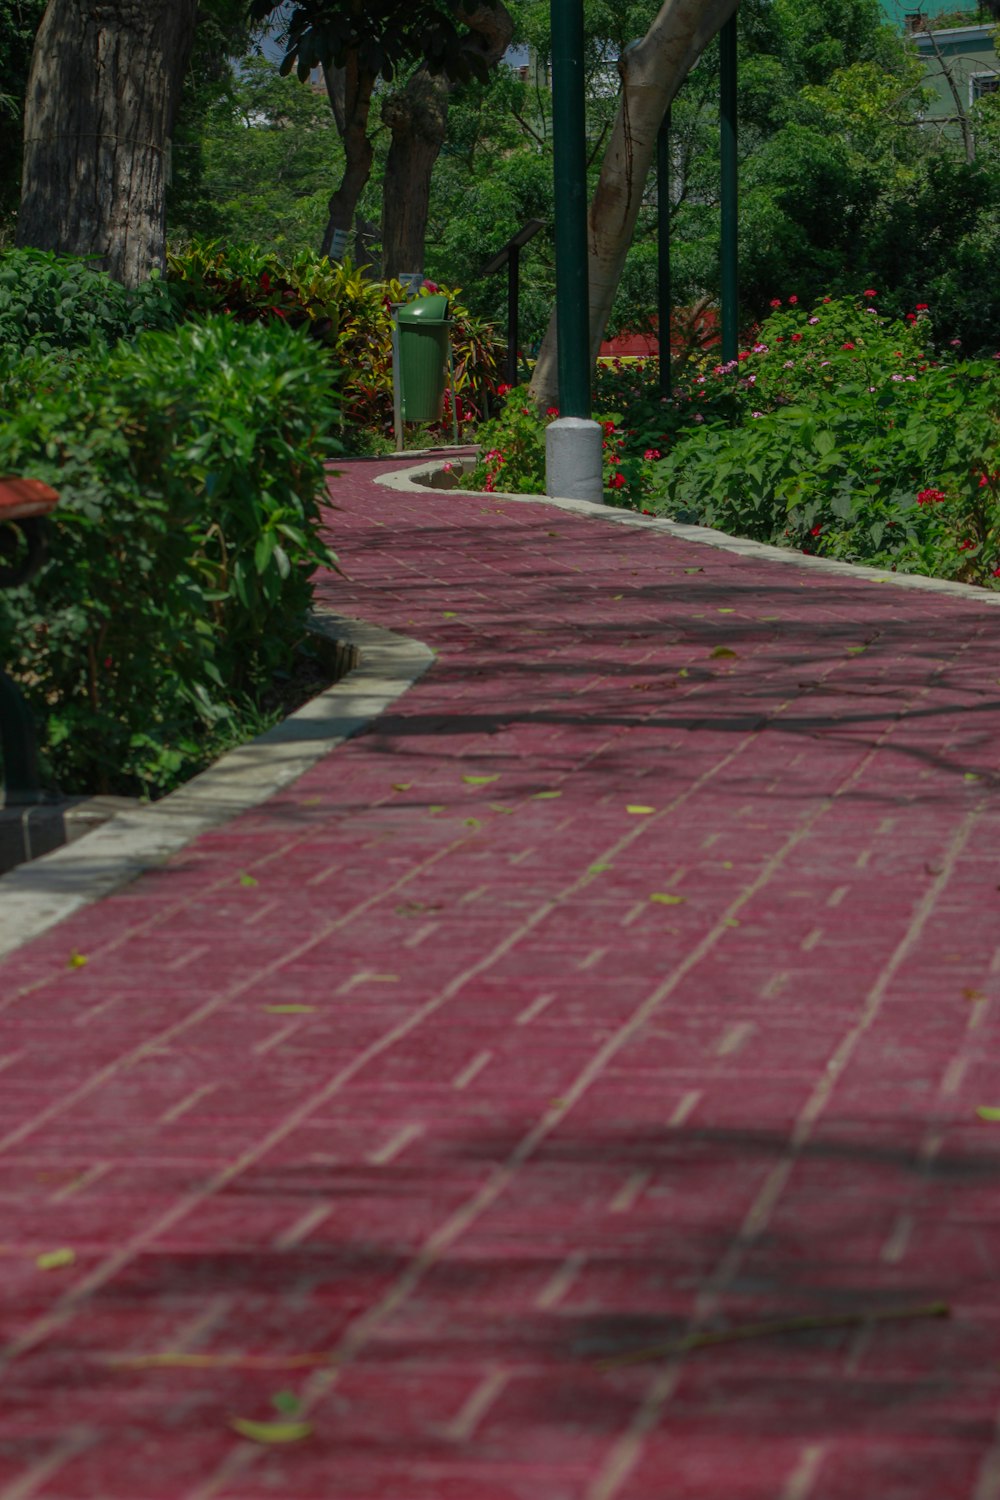 a red brick sidewalk with a bench and trees